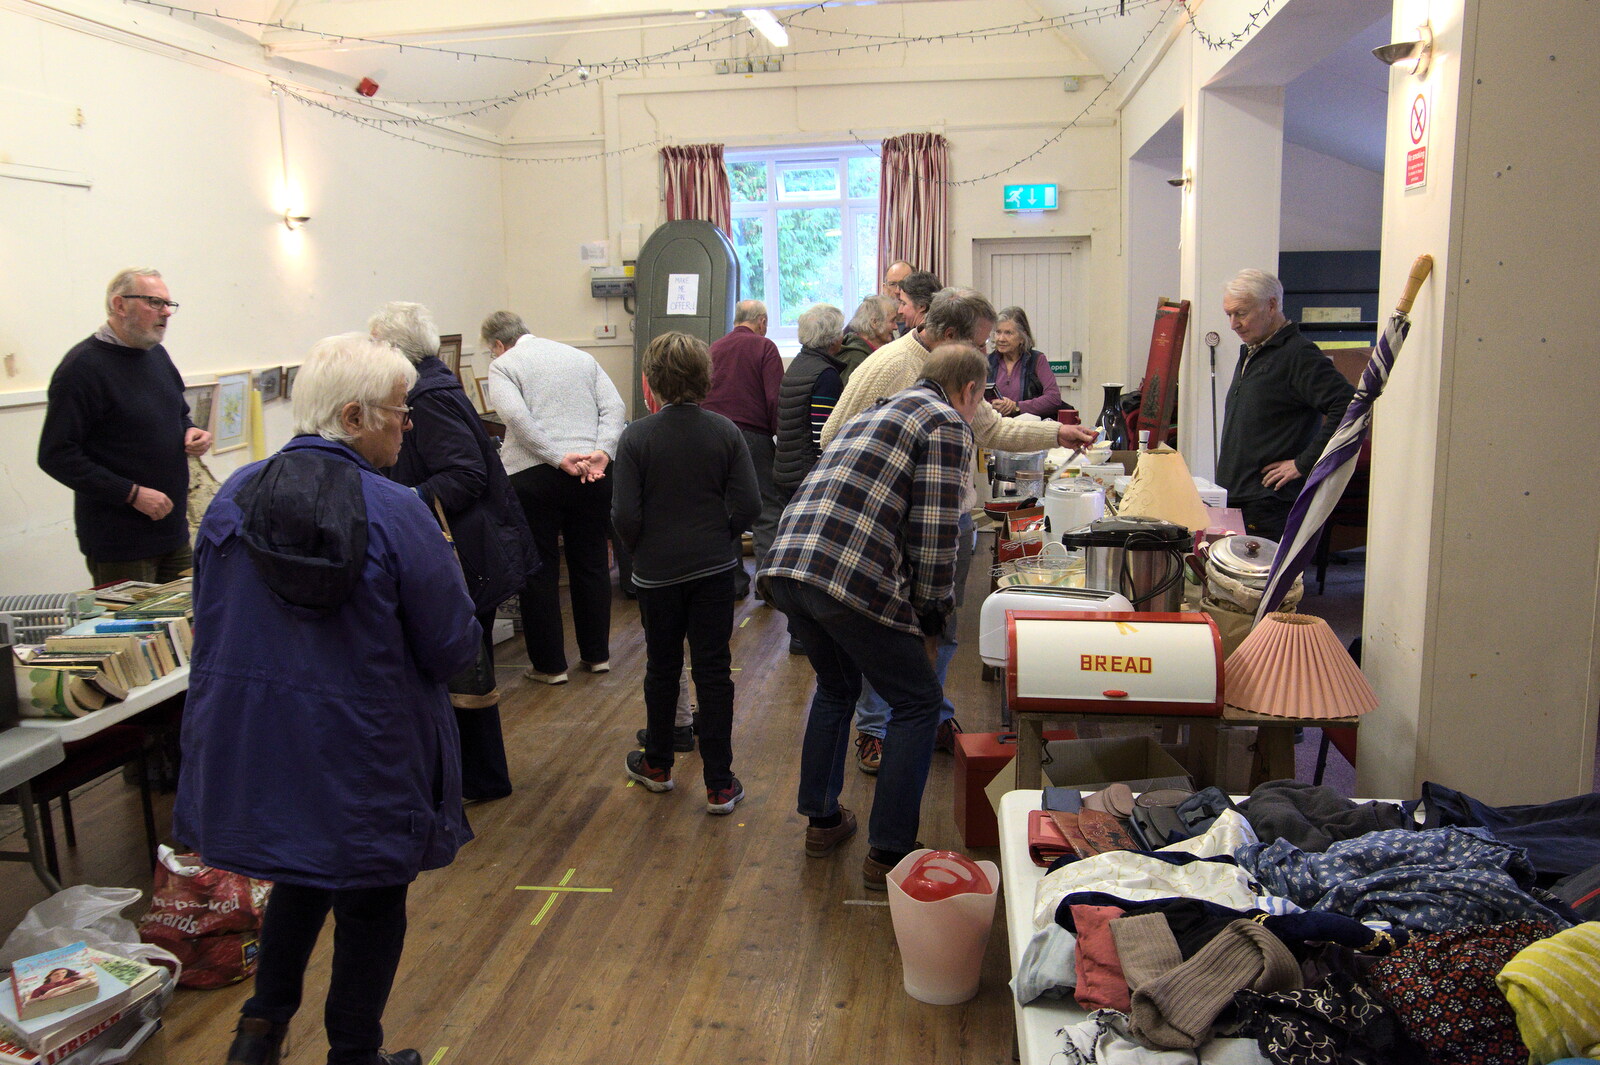 There's a jumble sale in the village hall from Norwich Lights and a Village Hall Jumble Sale, Brome, Suffolk - 20th November 2021